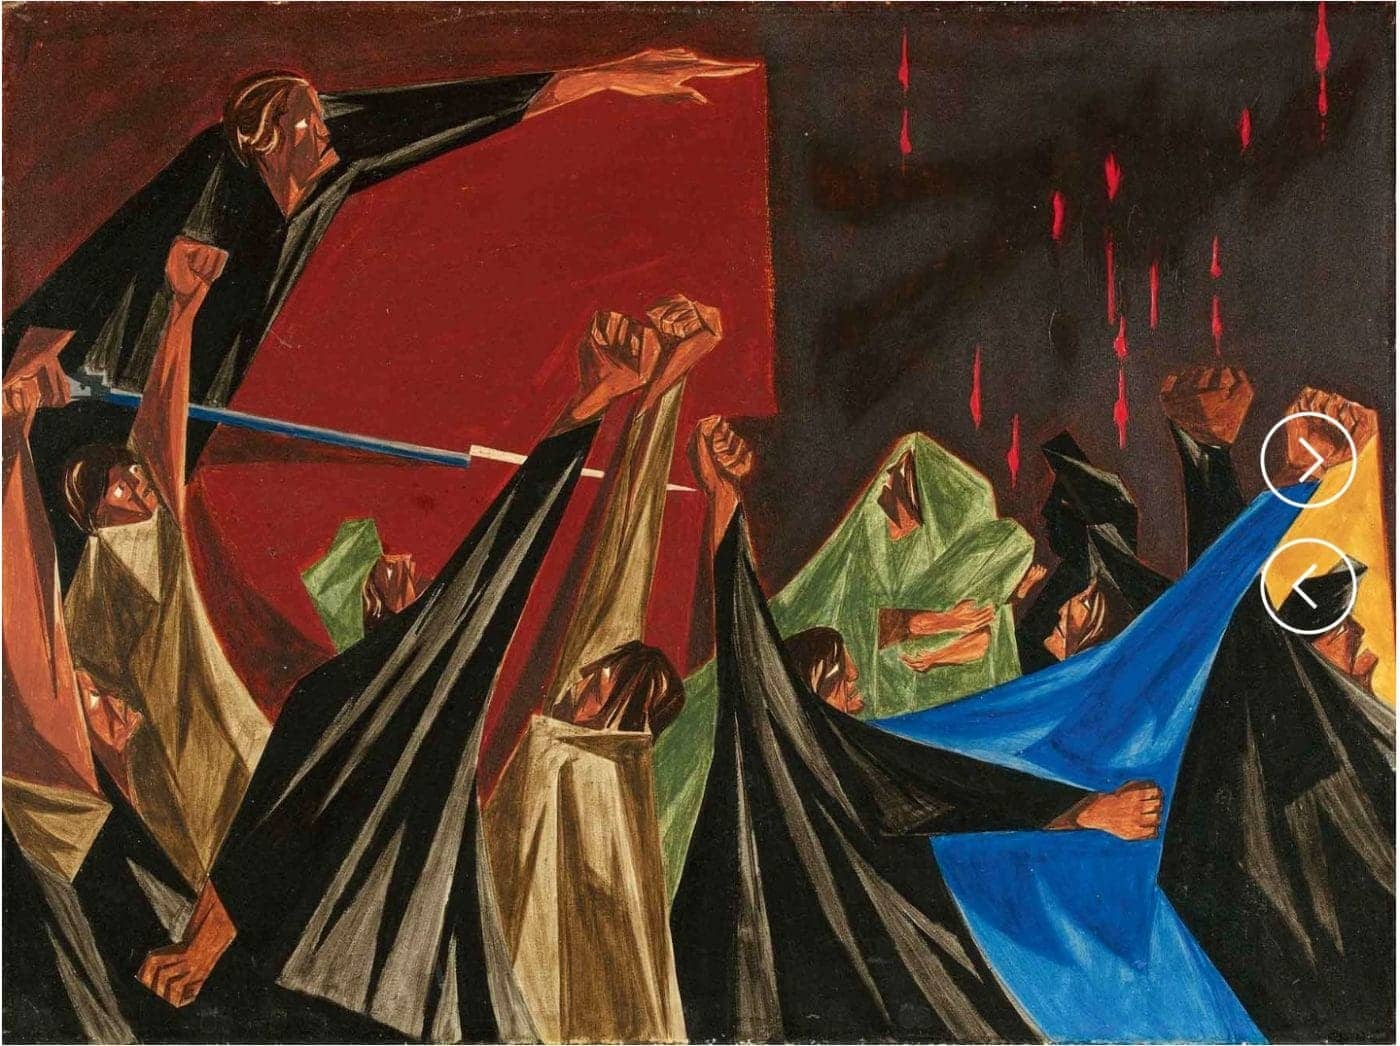 The-American-struggle-series-Jacob-Lawrence-1400x1046, Hidden truths: Taxpayers encouraging inhumanity in Texas?, Abolition Now! 